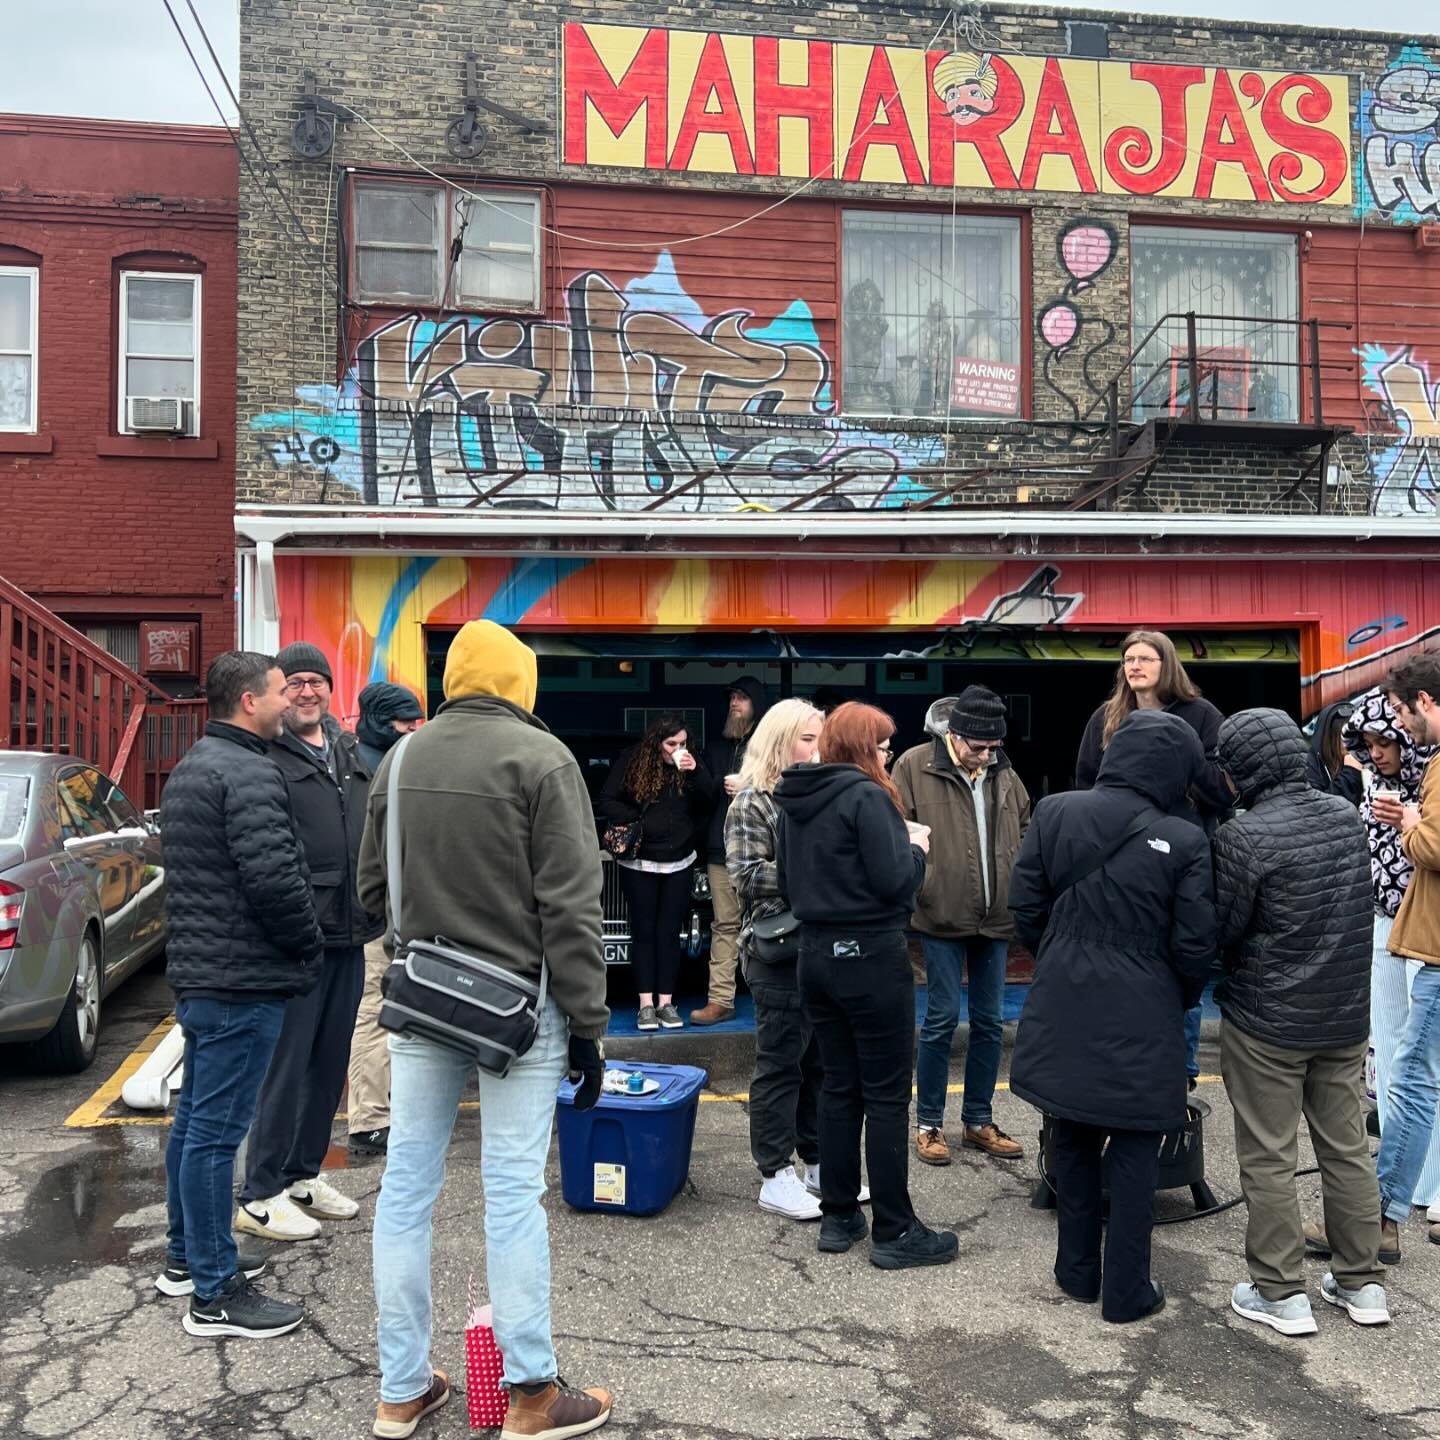 Thank you Cannabus!! Can&rsquo;t wait to hang with you all again, we are recovering from an amazing 420 and couldn&rsquo;t feel more grateful for the community vibes, generous product sponsors and beautiful venues.  Recap reel coming soon&hellip;💨